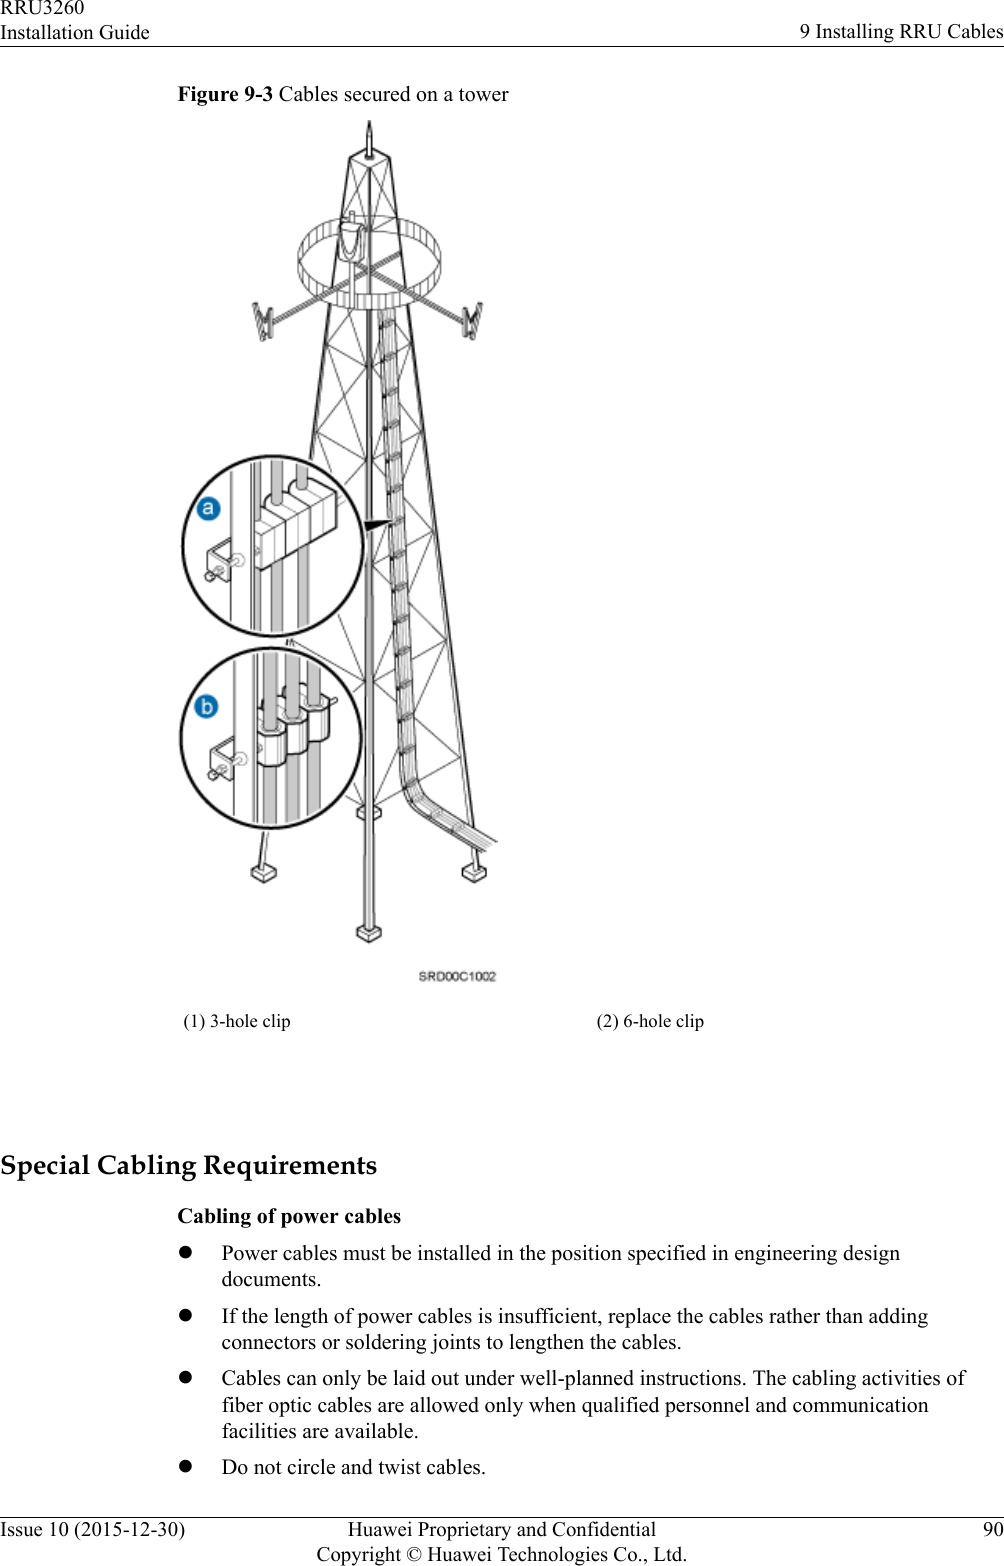 Figure 9-3 Cables secured on a tower(1) 3-hole clip (2) 6-hole clip Special Cabling RequirementsCabling of power cableslPower cables must be installed in the position specified in engineering designdocuments.lIf the length of power cables is insufficient, replace the cables rather than addingconnectors or soldering joints to lengthen the cables.lCables can only be laid out under well-planned instructions. The cabling activities offiber optic cables are allowed only when qualified personnel and communicationfacilities are available.lDo not circle and twist cables.RRU3260Installation Guide 9 Installing RRU CablesIssue 10 (2015-12-30) Huawei Proprietary and ConfidentialCopyright © Huawei Technologies Co., Ltd.90